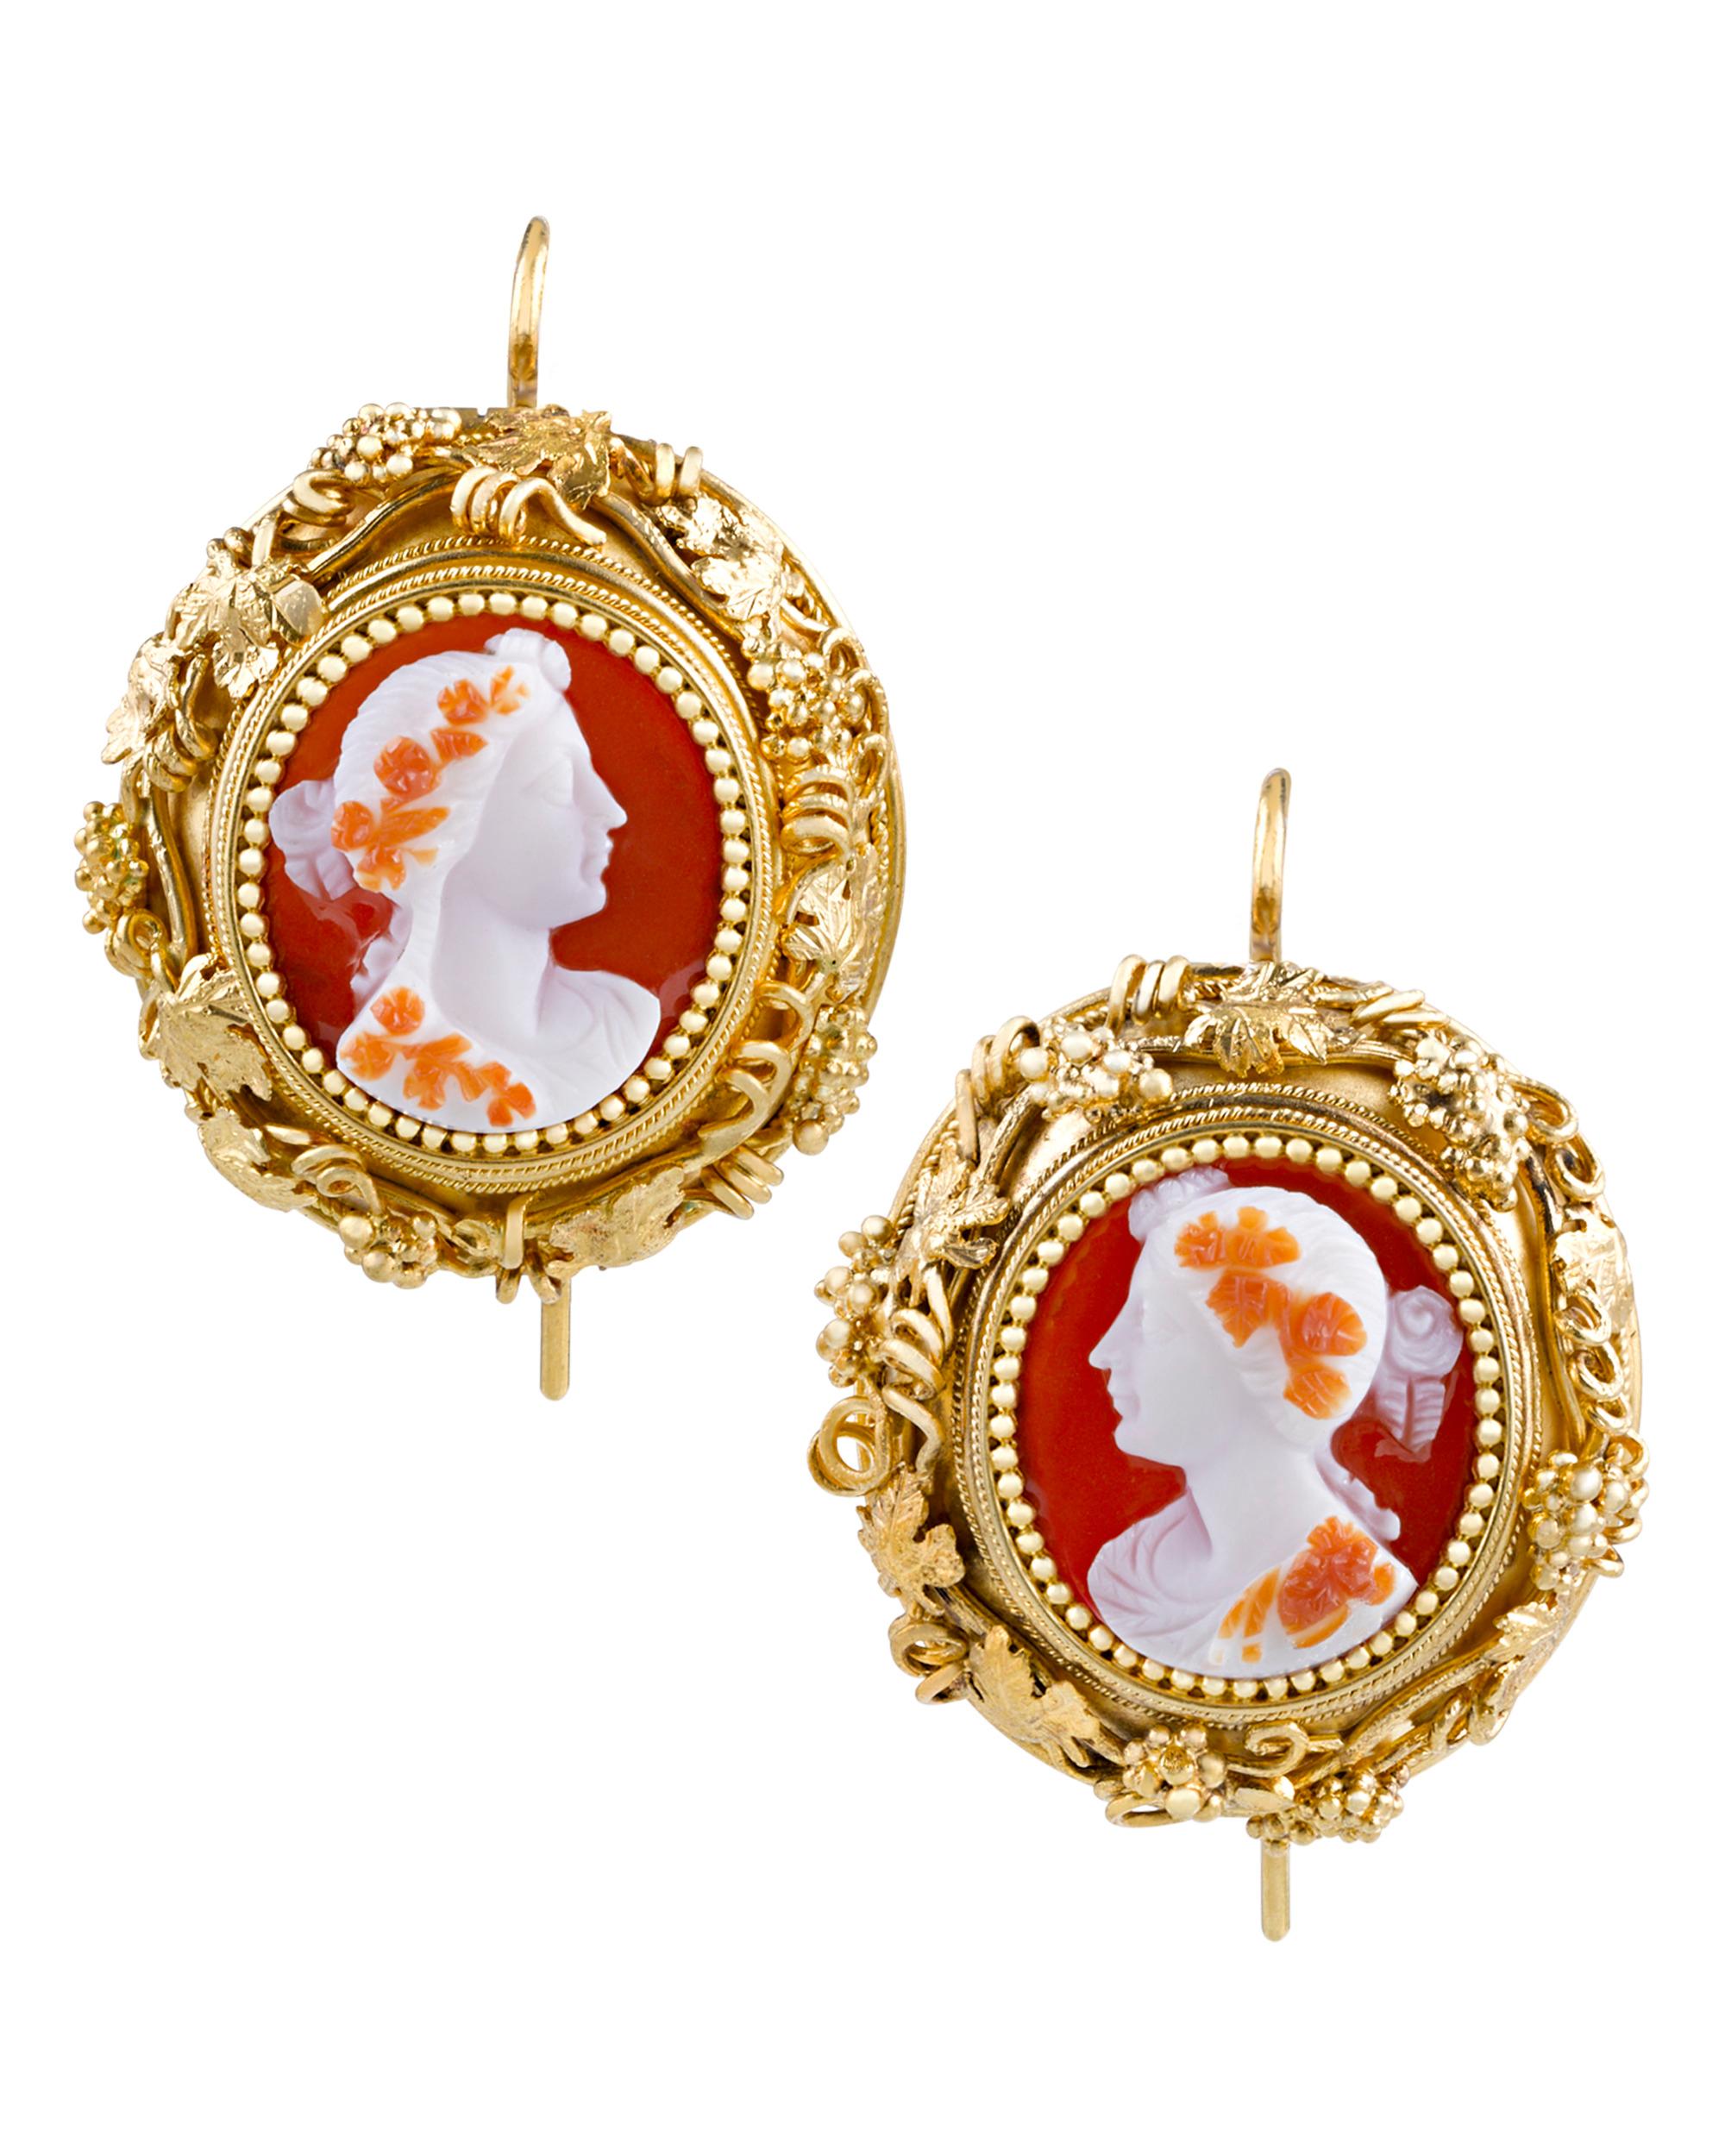 cameo jewelry meaning